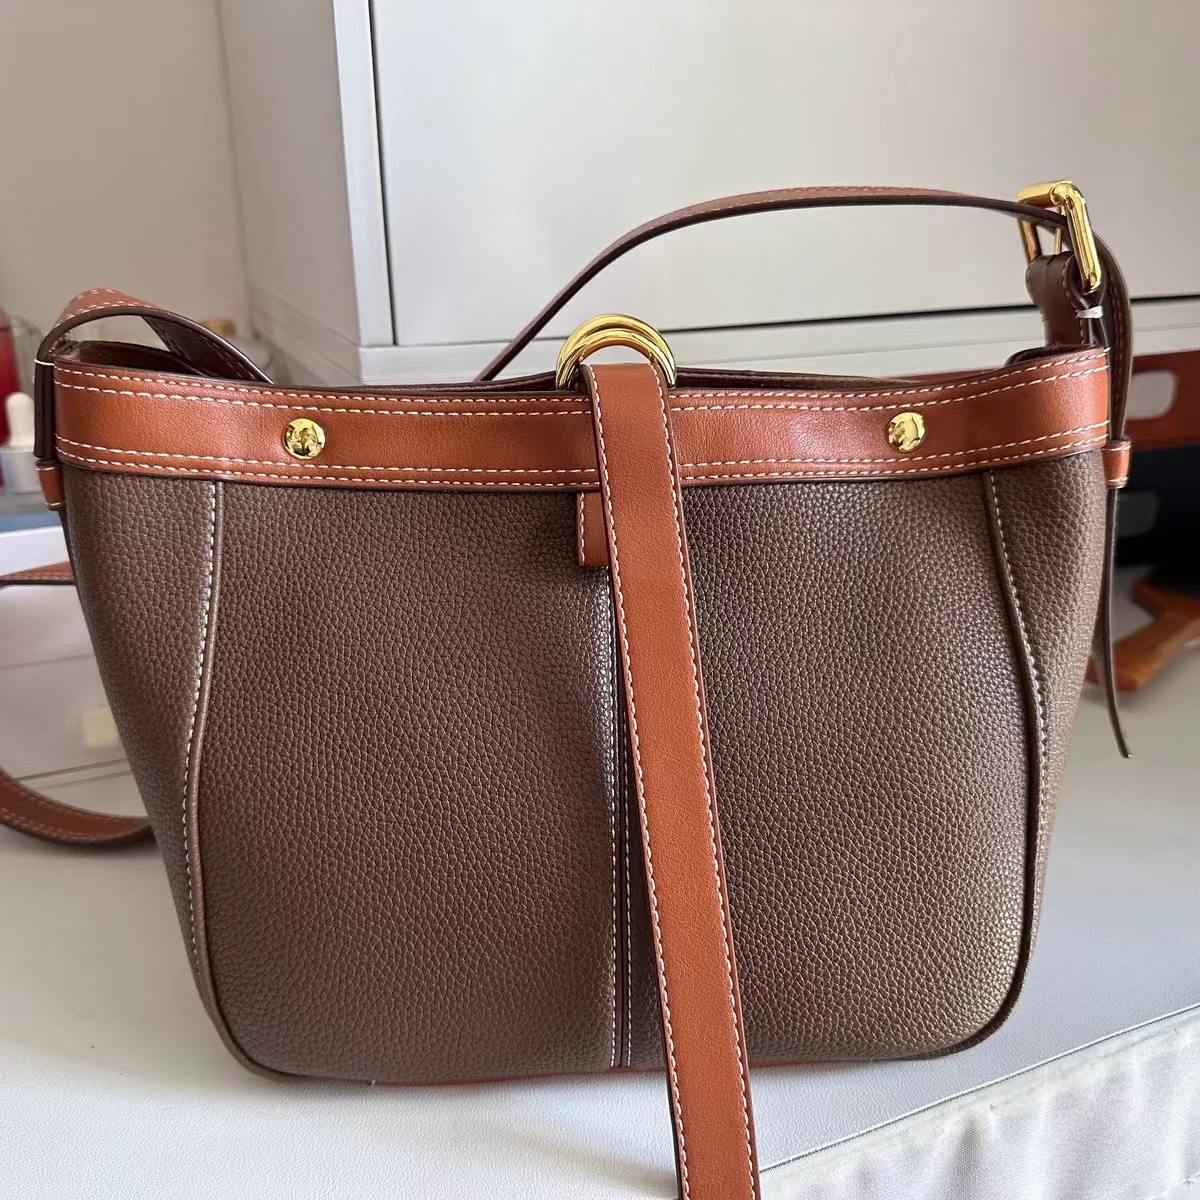 Women's Stitching Genuine Leather Tote Bags with Interior Pouch photo review